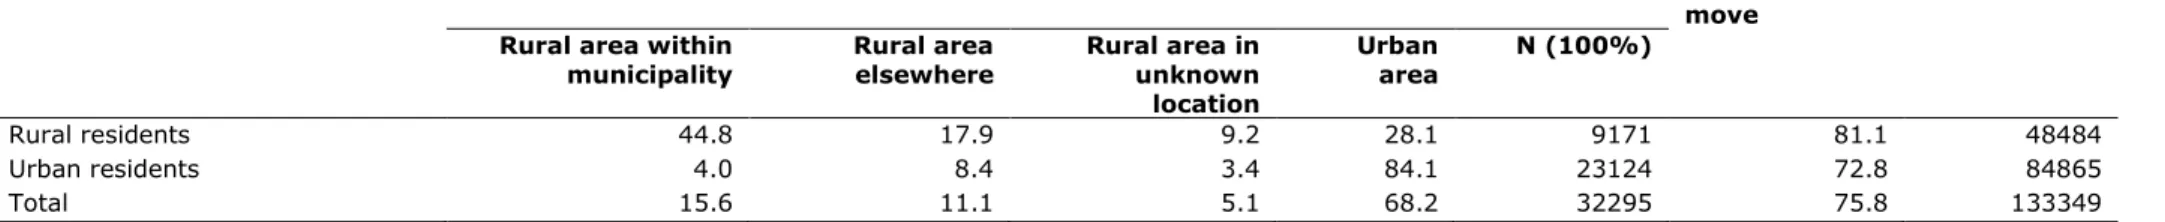 Table 2 Mobility intention and location preferences among rural residents and non-rural residents, percentages 